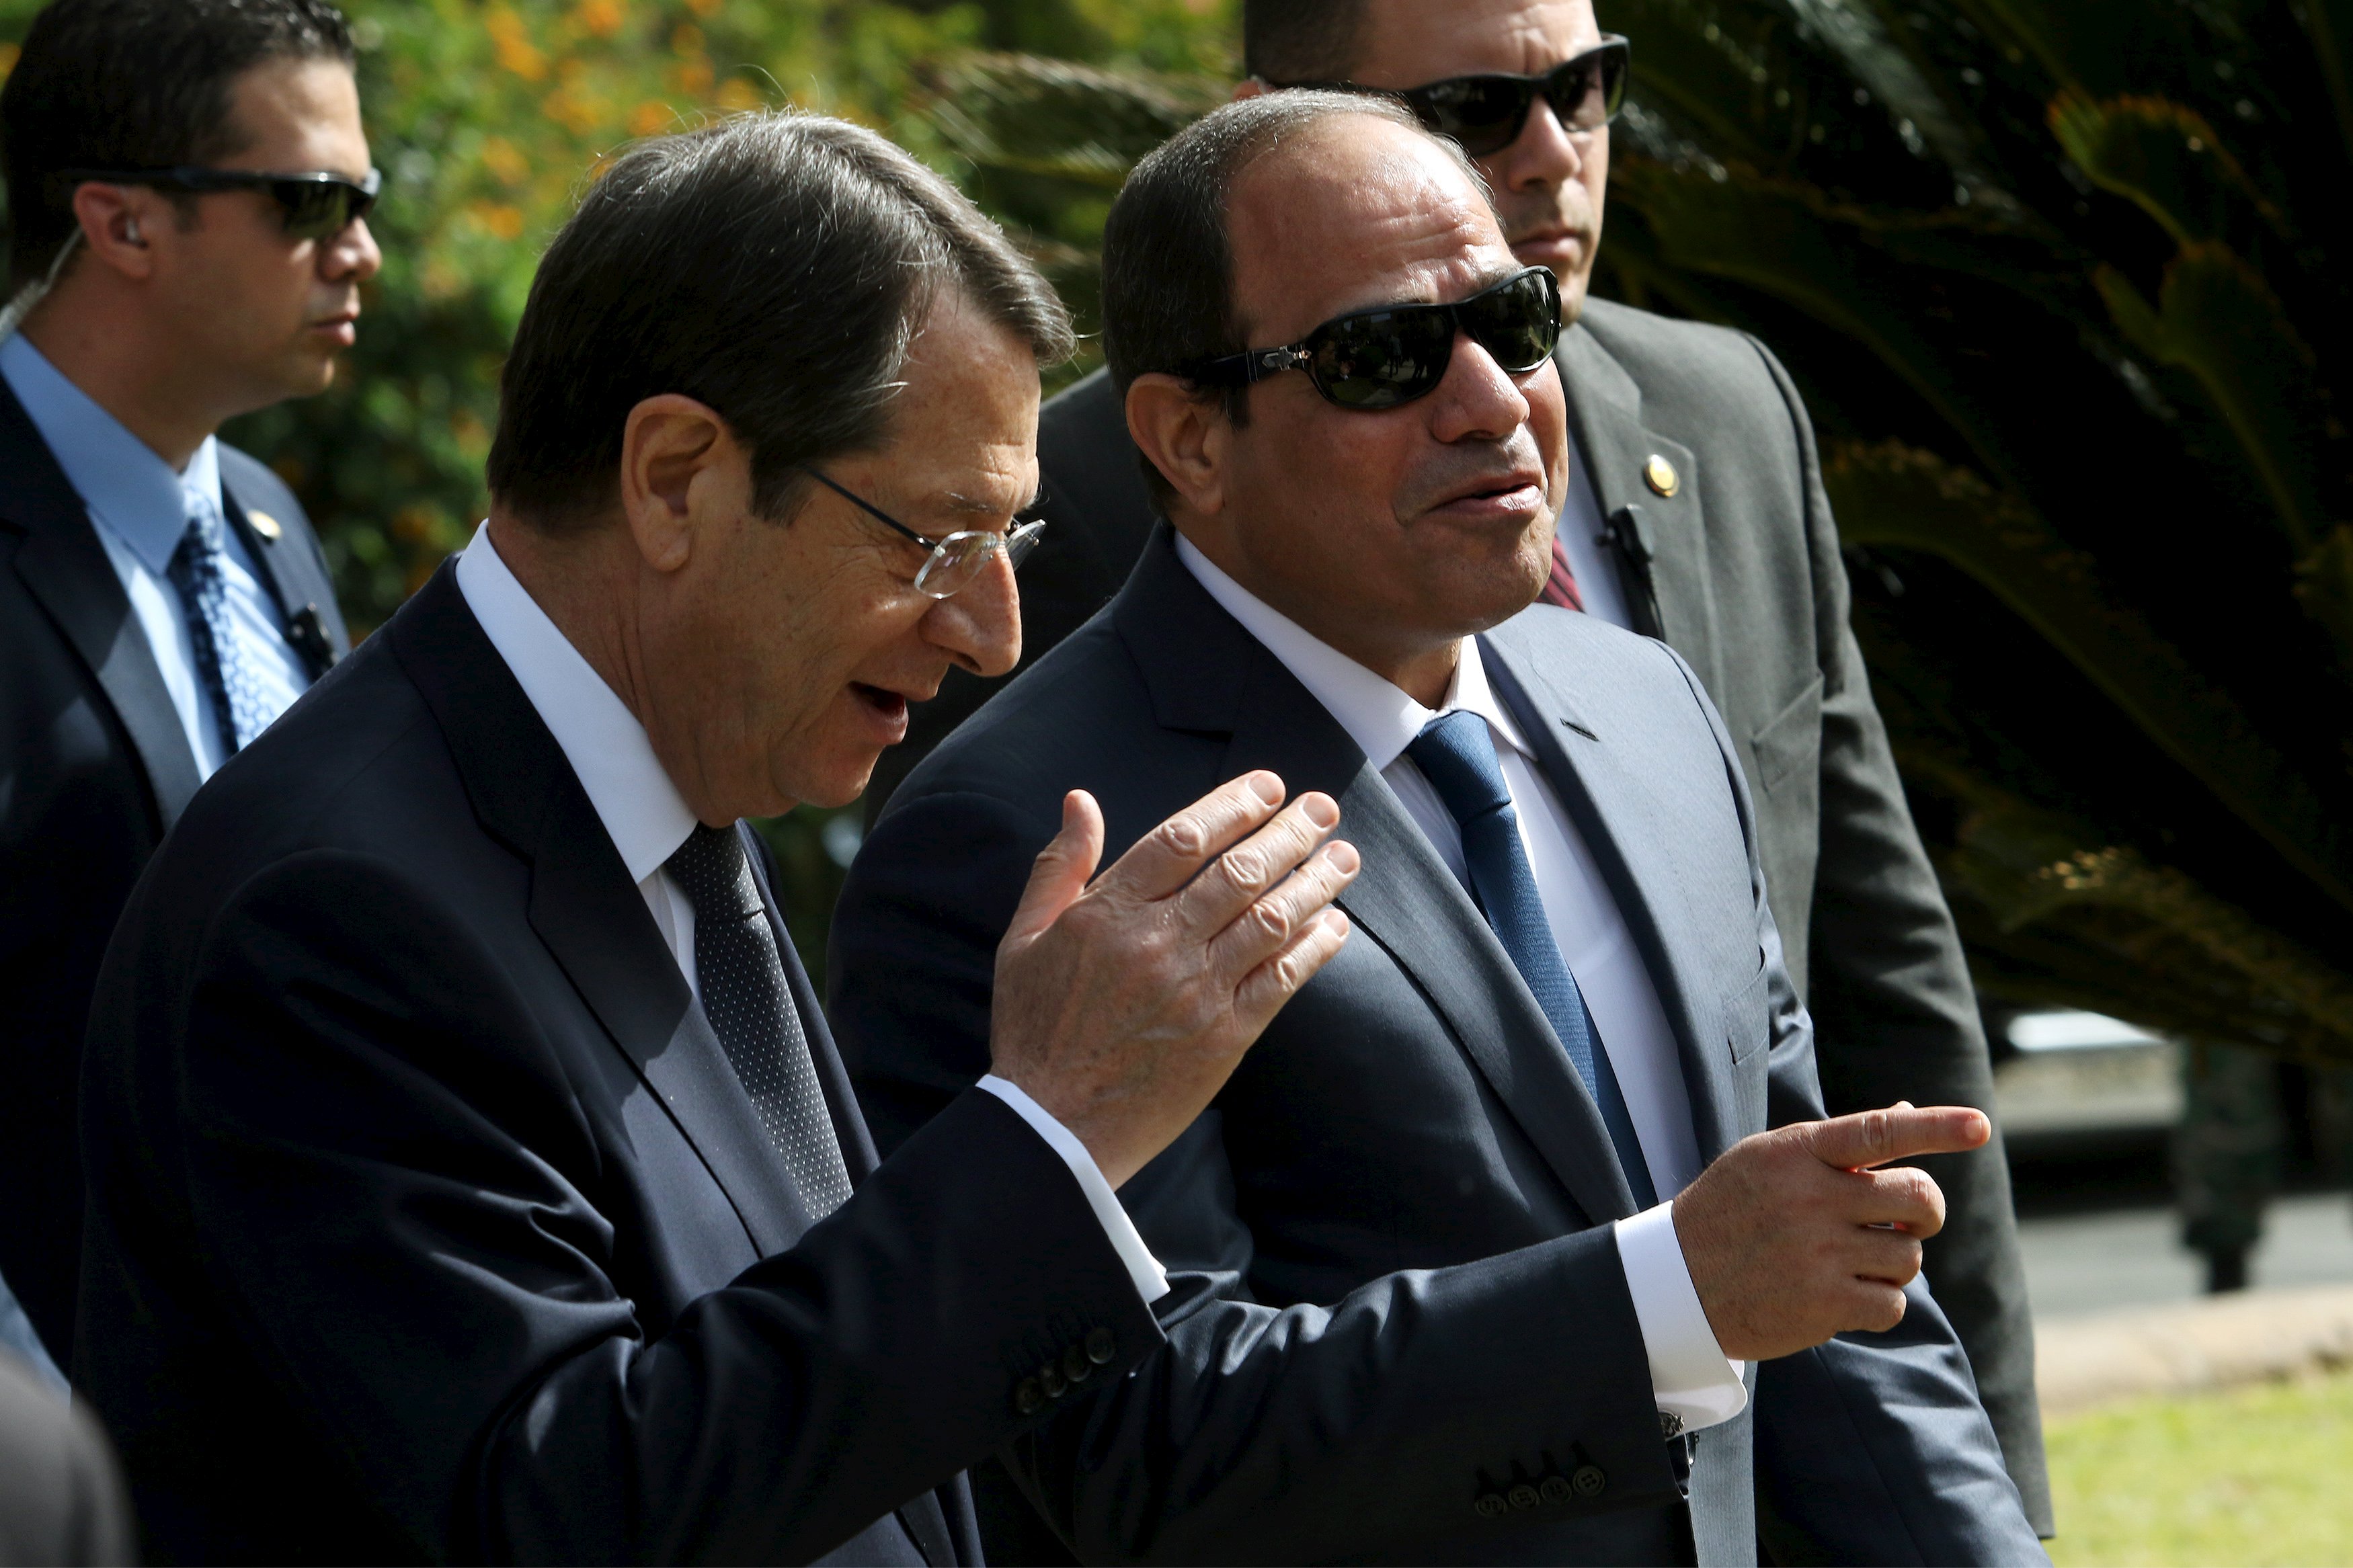 Cypriot President Nicos Anastasiades (L) and Egyptian President Abdel Fattah al-Sisi chat as they enter the Presidential Palace in Nicosia, April 29, 2015. Sisi was in Cyprus to discuss regional cooperation with Anastasiades and Greek Prime Minister Alexis Tsipras.  REUTERS/Yiannis Kourtoglou